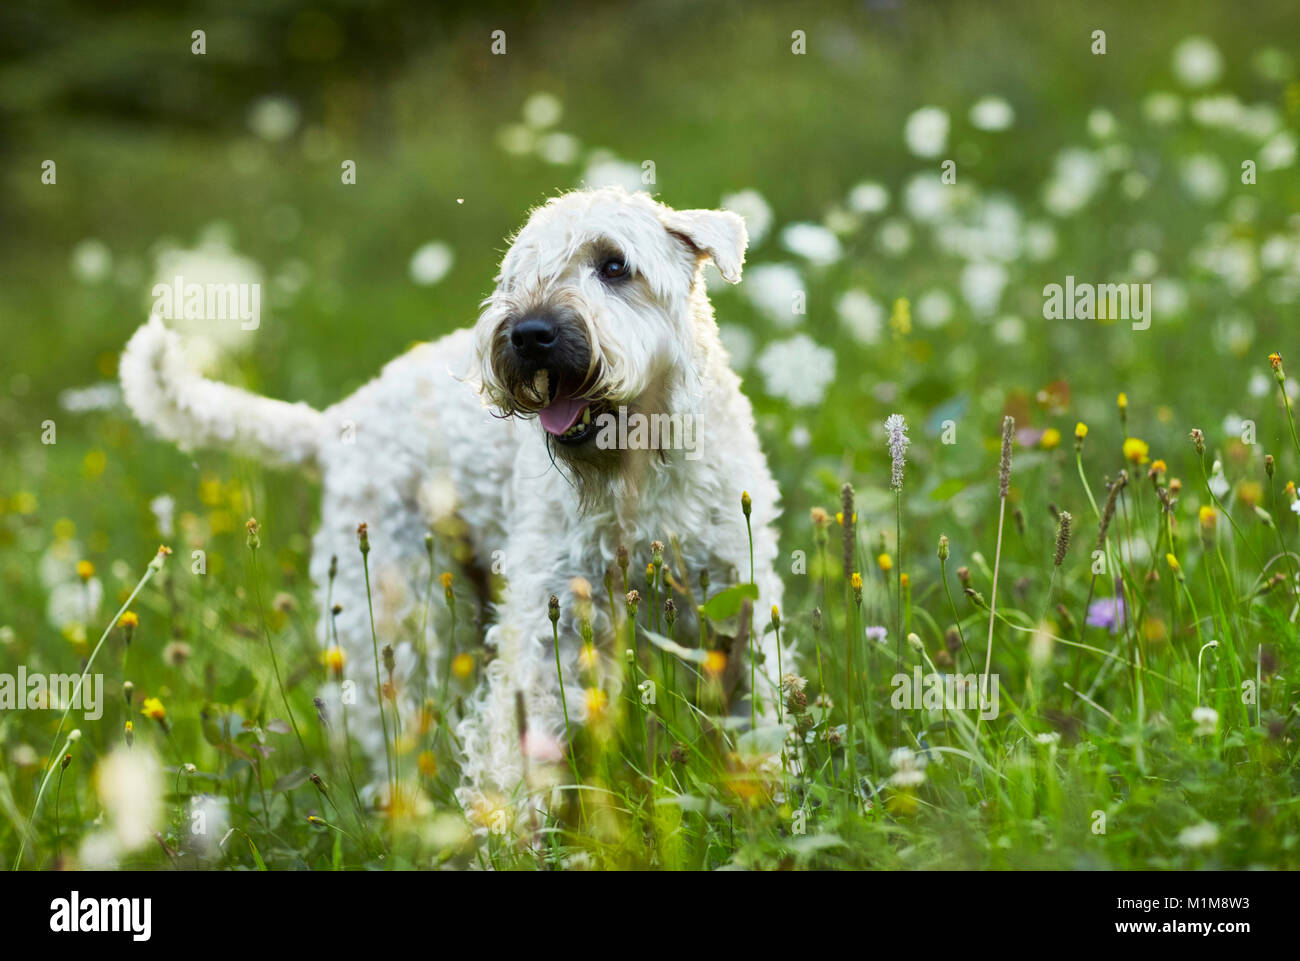 Irish Soft Coated Wheaten Terrier. Adult dog standing in a flowering meadow. Germany. Stock Photo